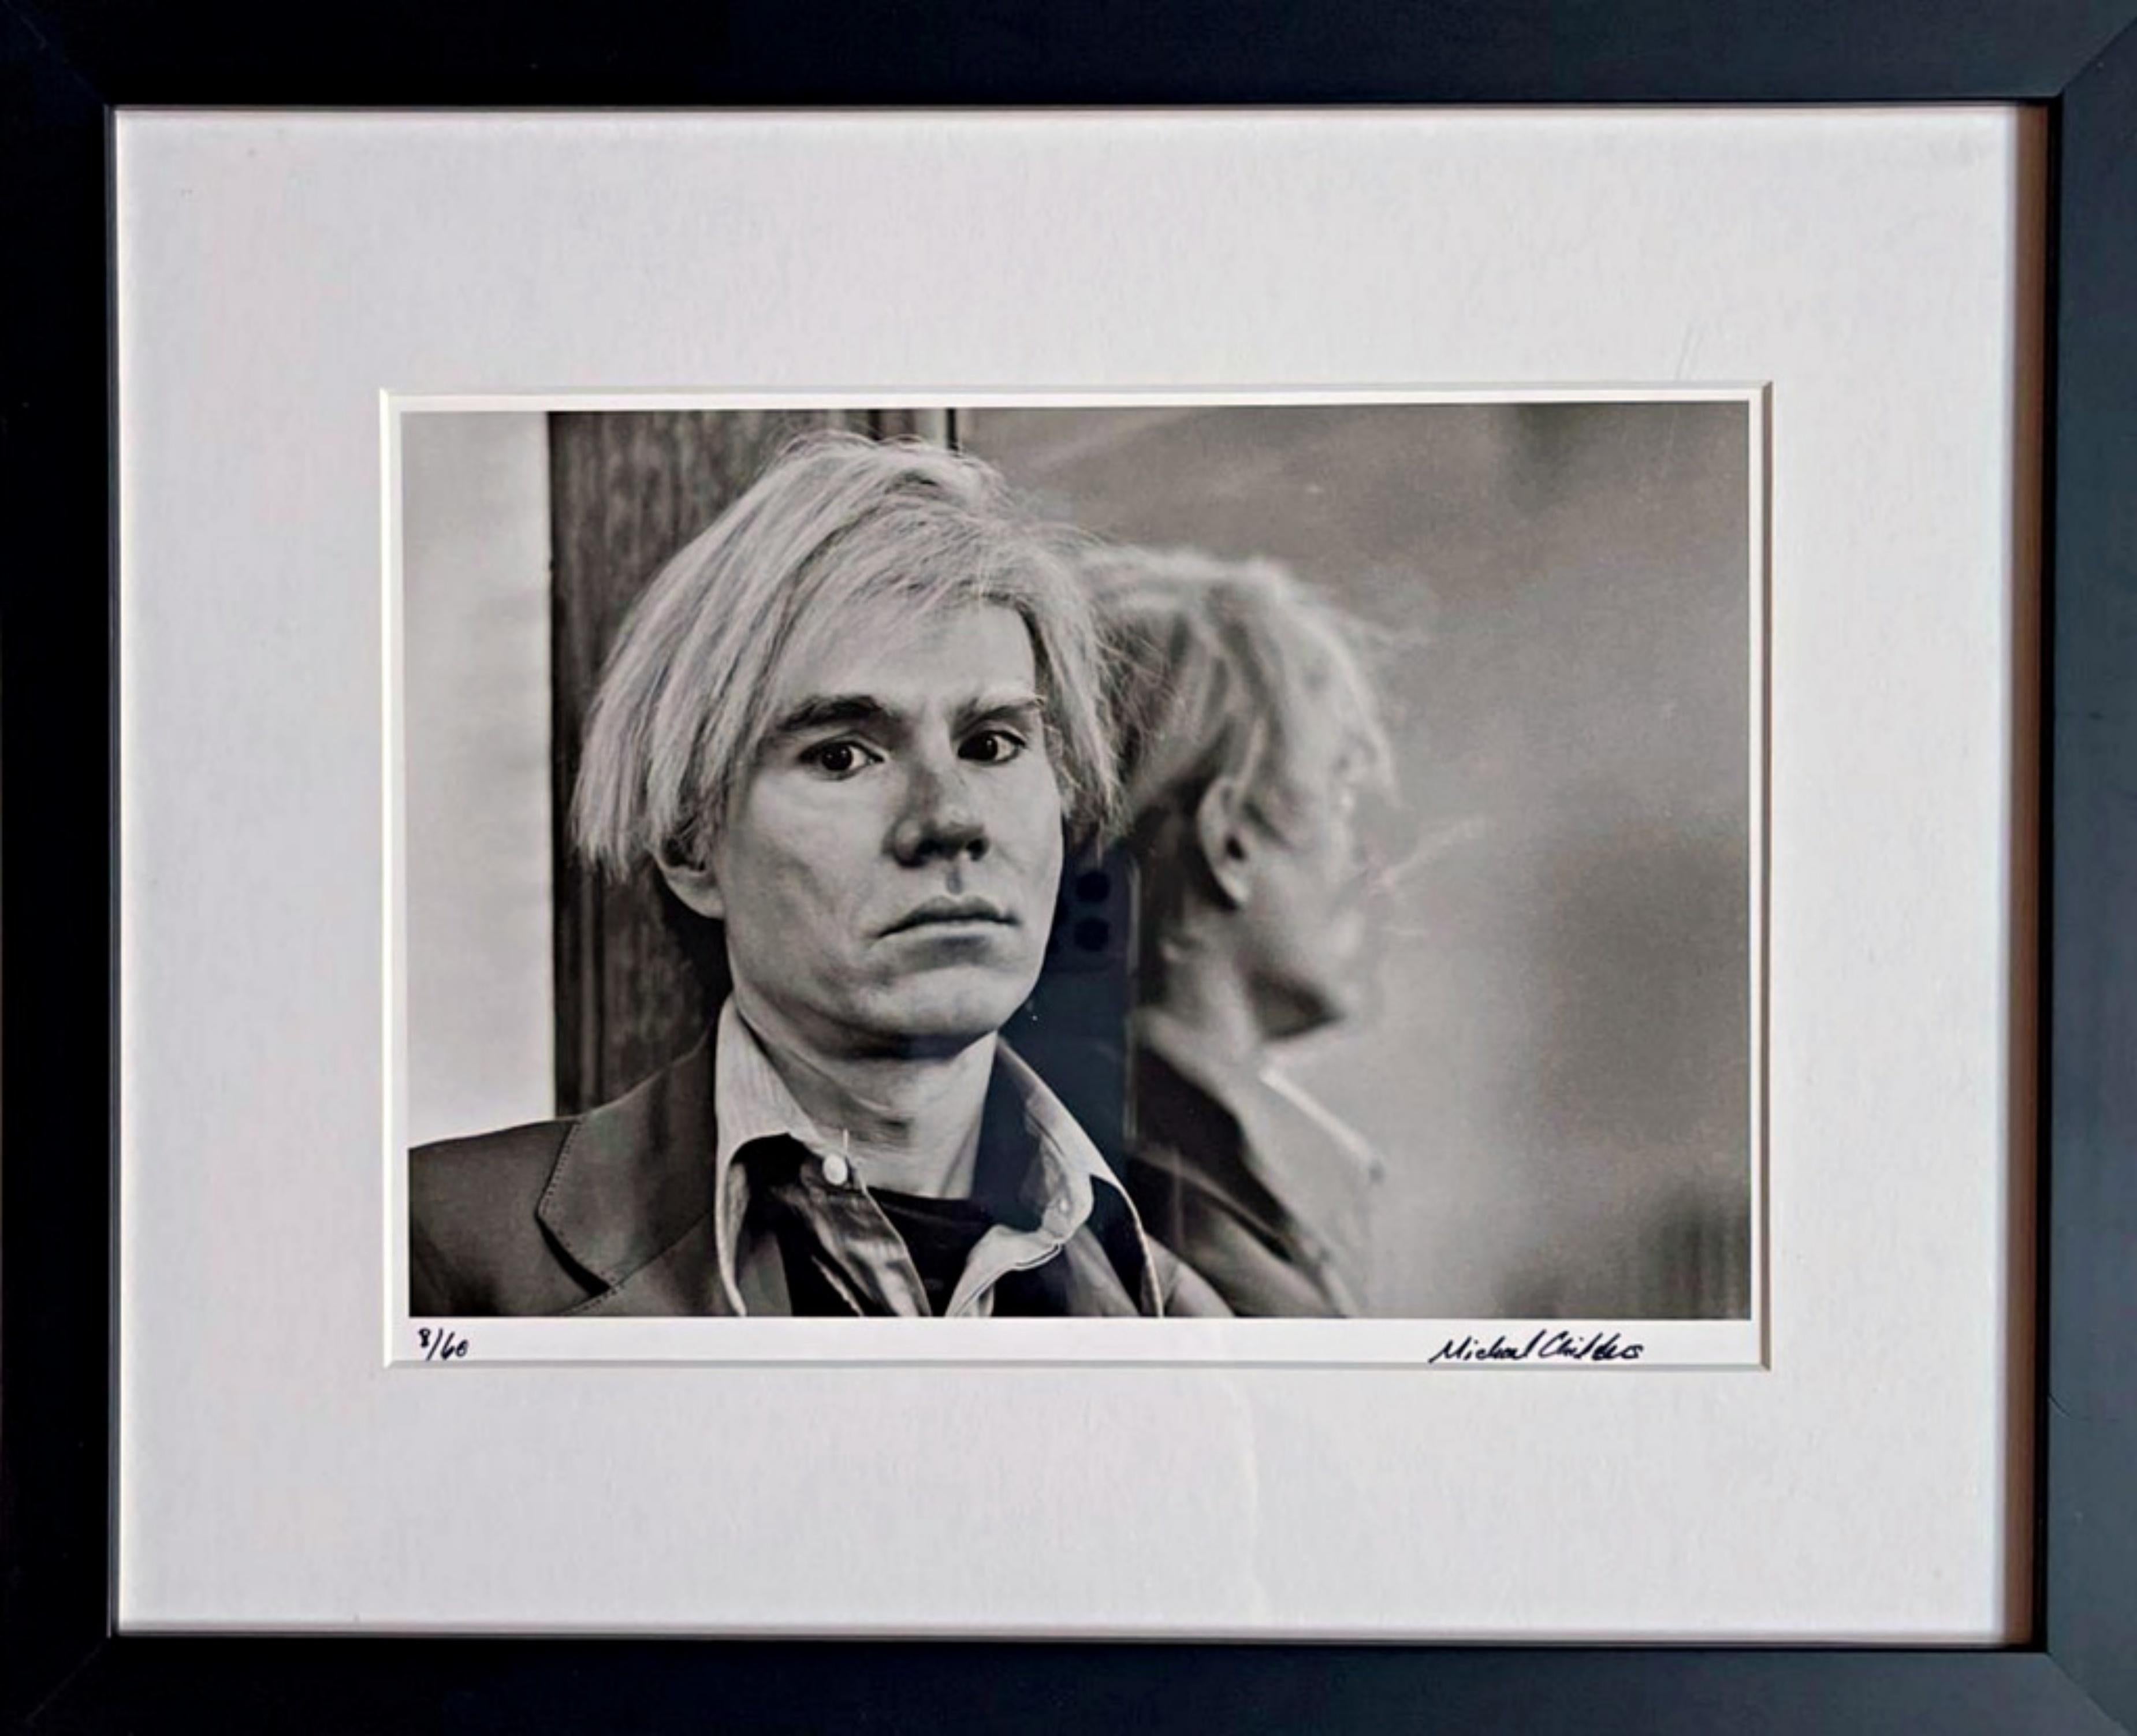 Michael Childers Black and White Photograph – Andy Warhol in New York, 1976, 2007, handsigniertes Foto 8/60 für Museum